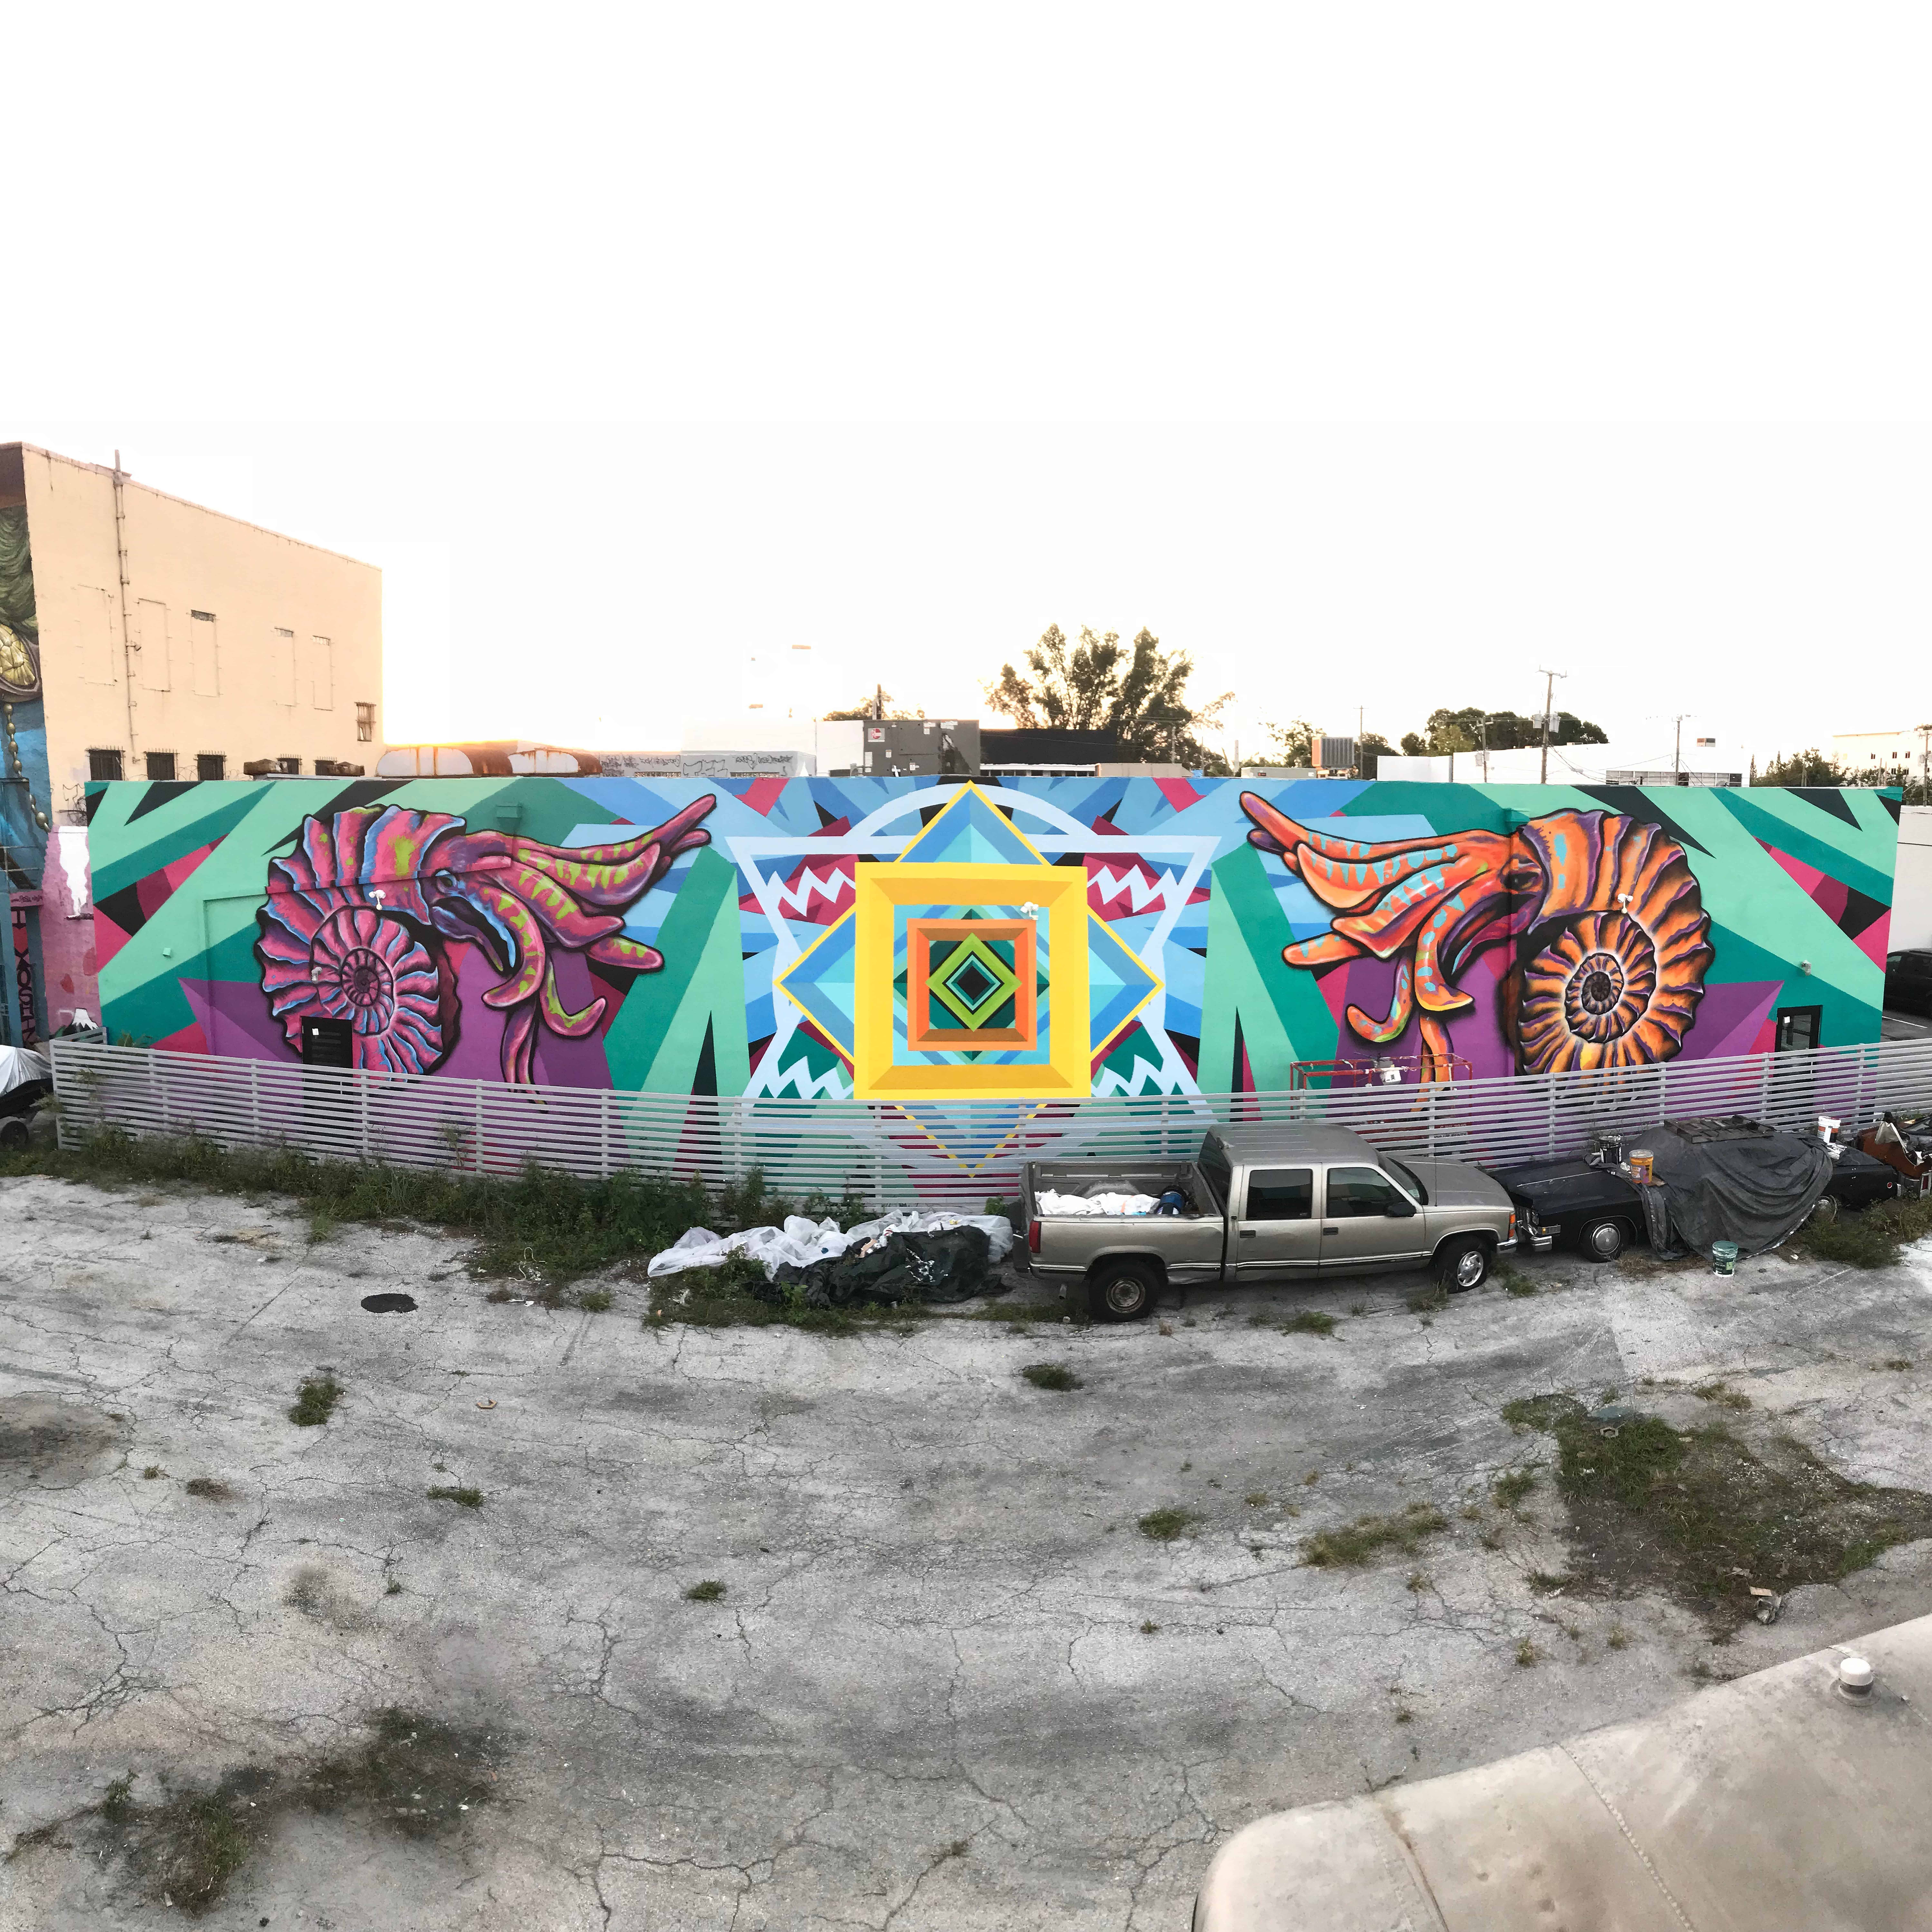 Art Basel, Miami Art week, mural designed by Jason T. Graves and Patrick McKinney painted in Wynwood, Miami, Florida.